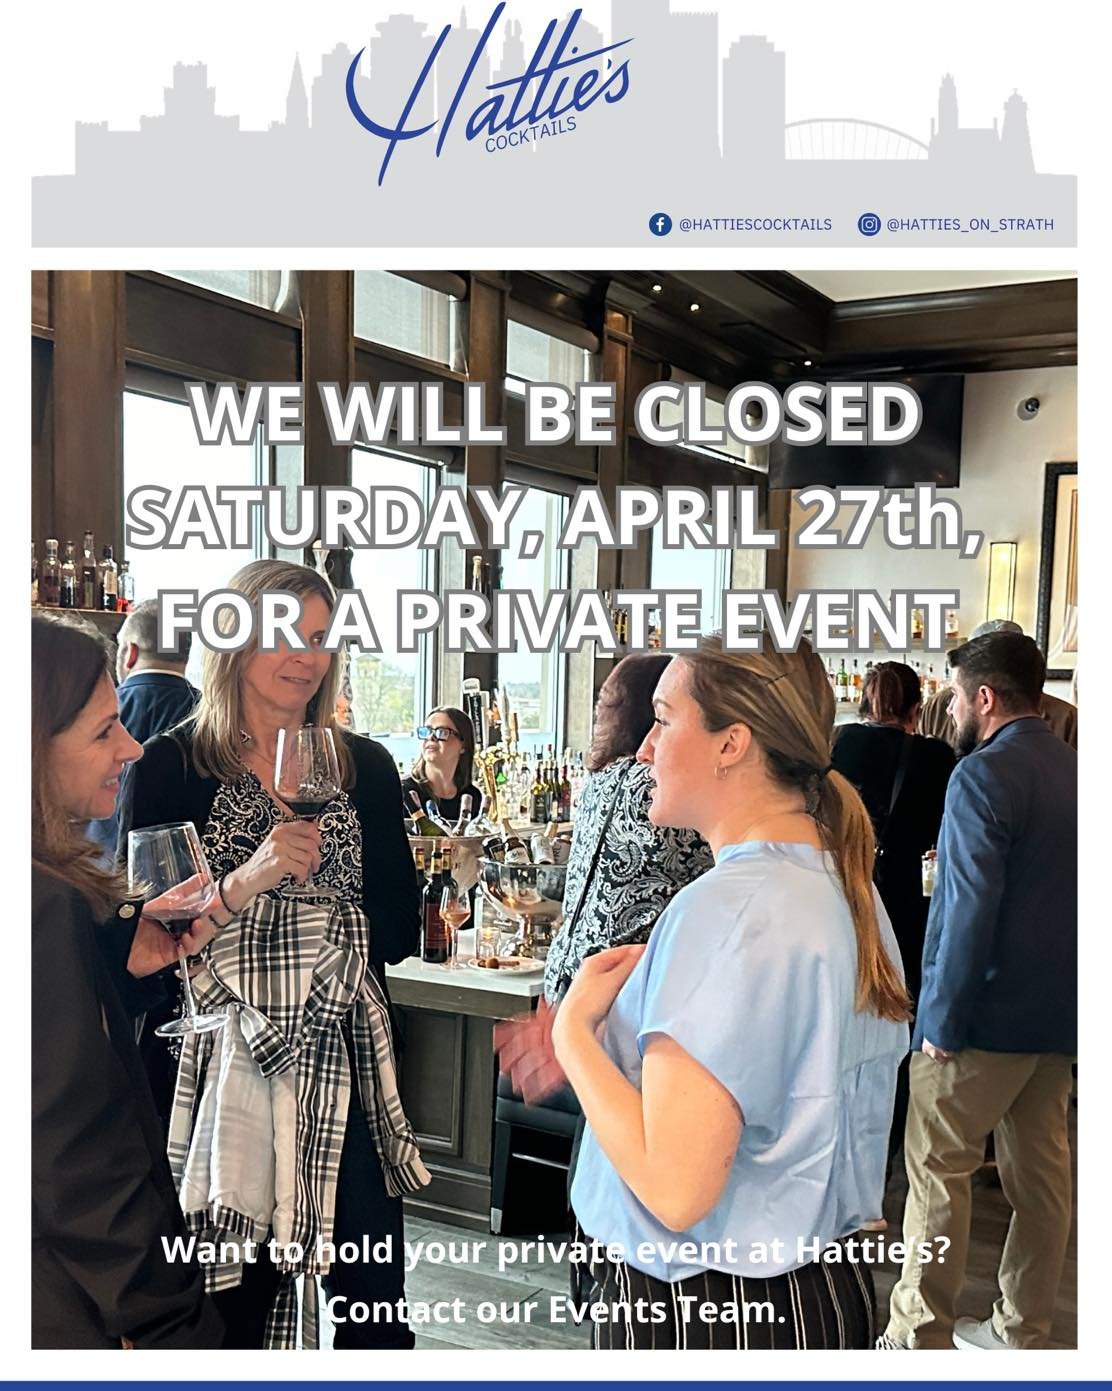 We are closed tonight for a private event but will be open in Char for drinks. Join us tomorrow for Drag Me to Brunch! 
.
.
.
#roc #rochesterny #rooftopbar #privateevents #eventvenue